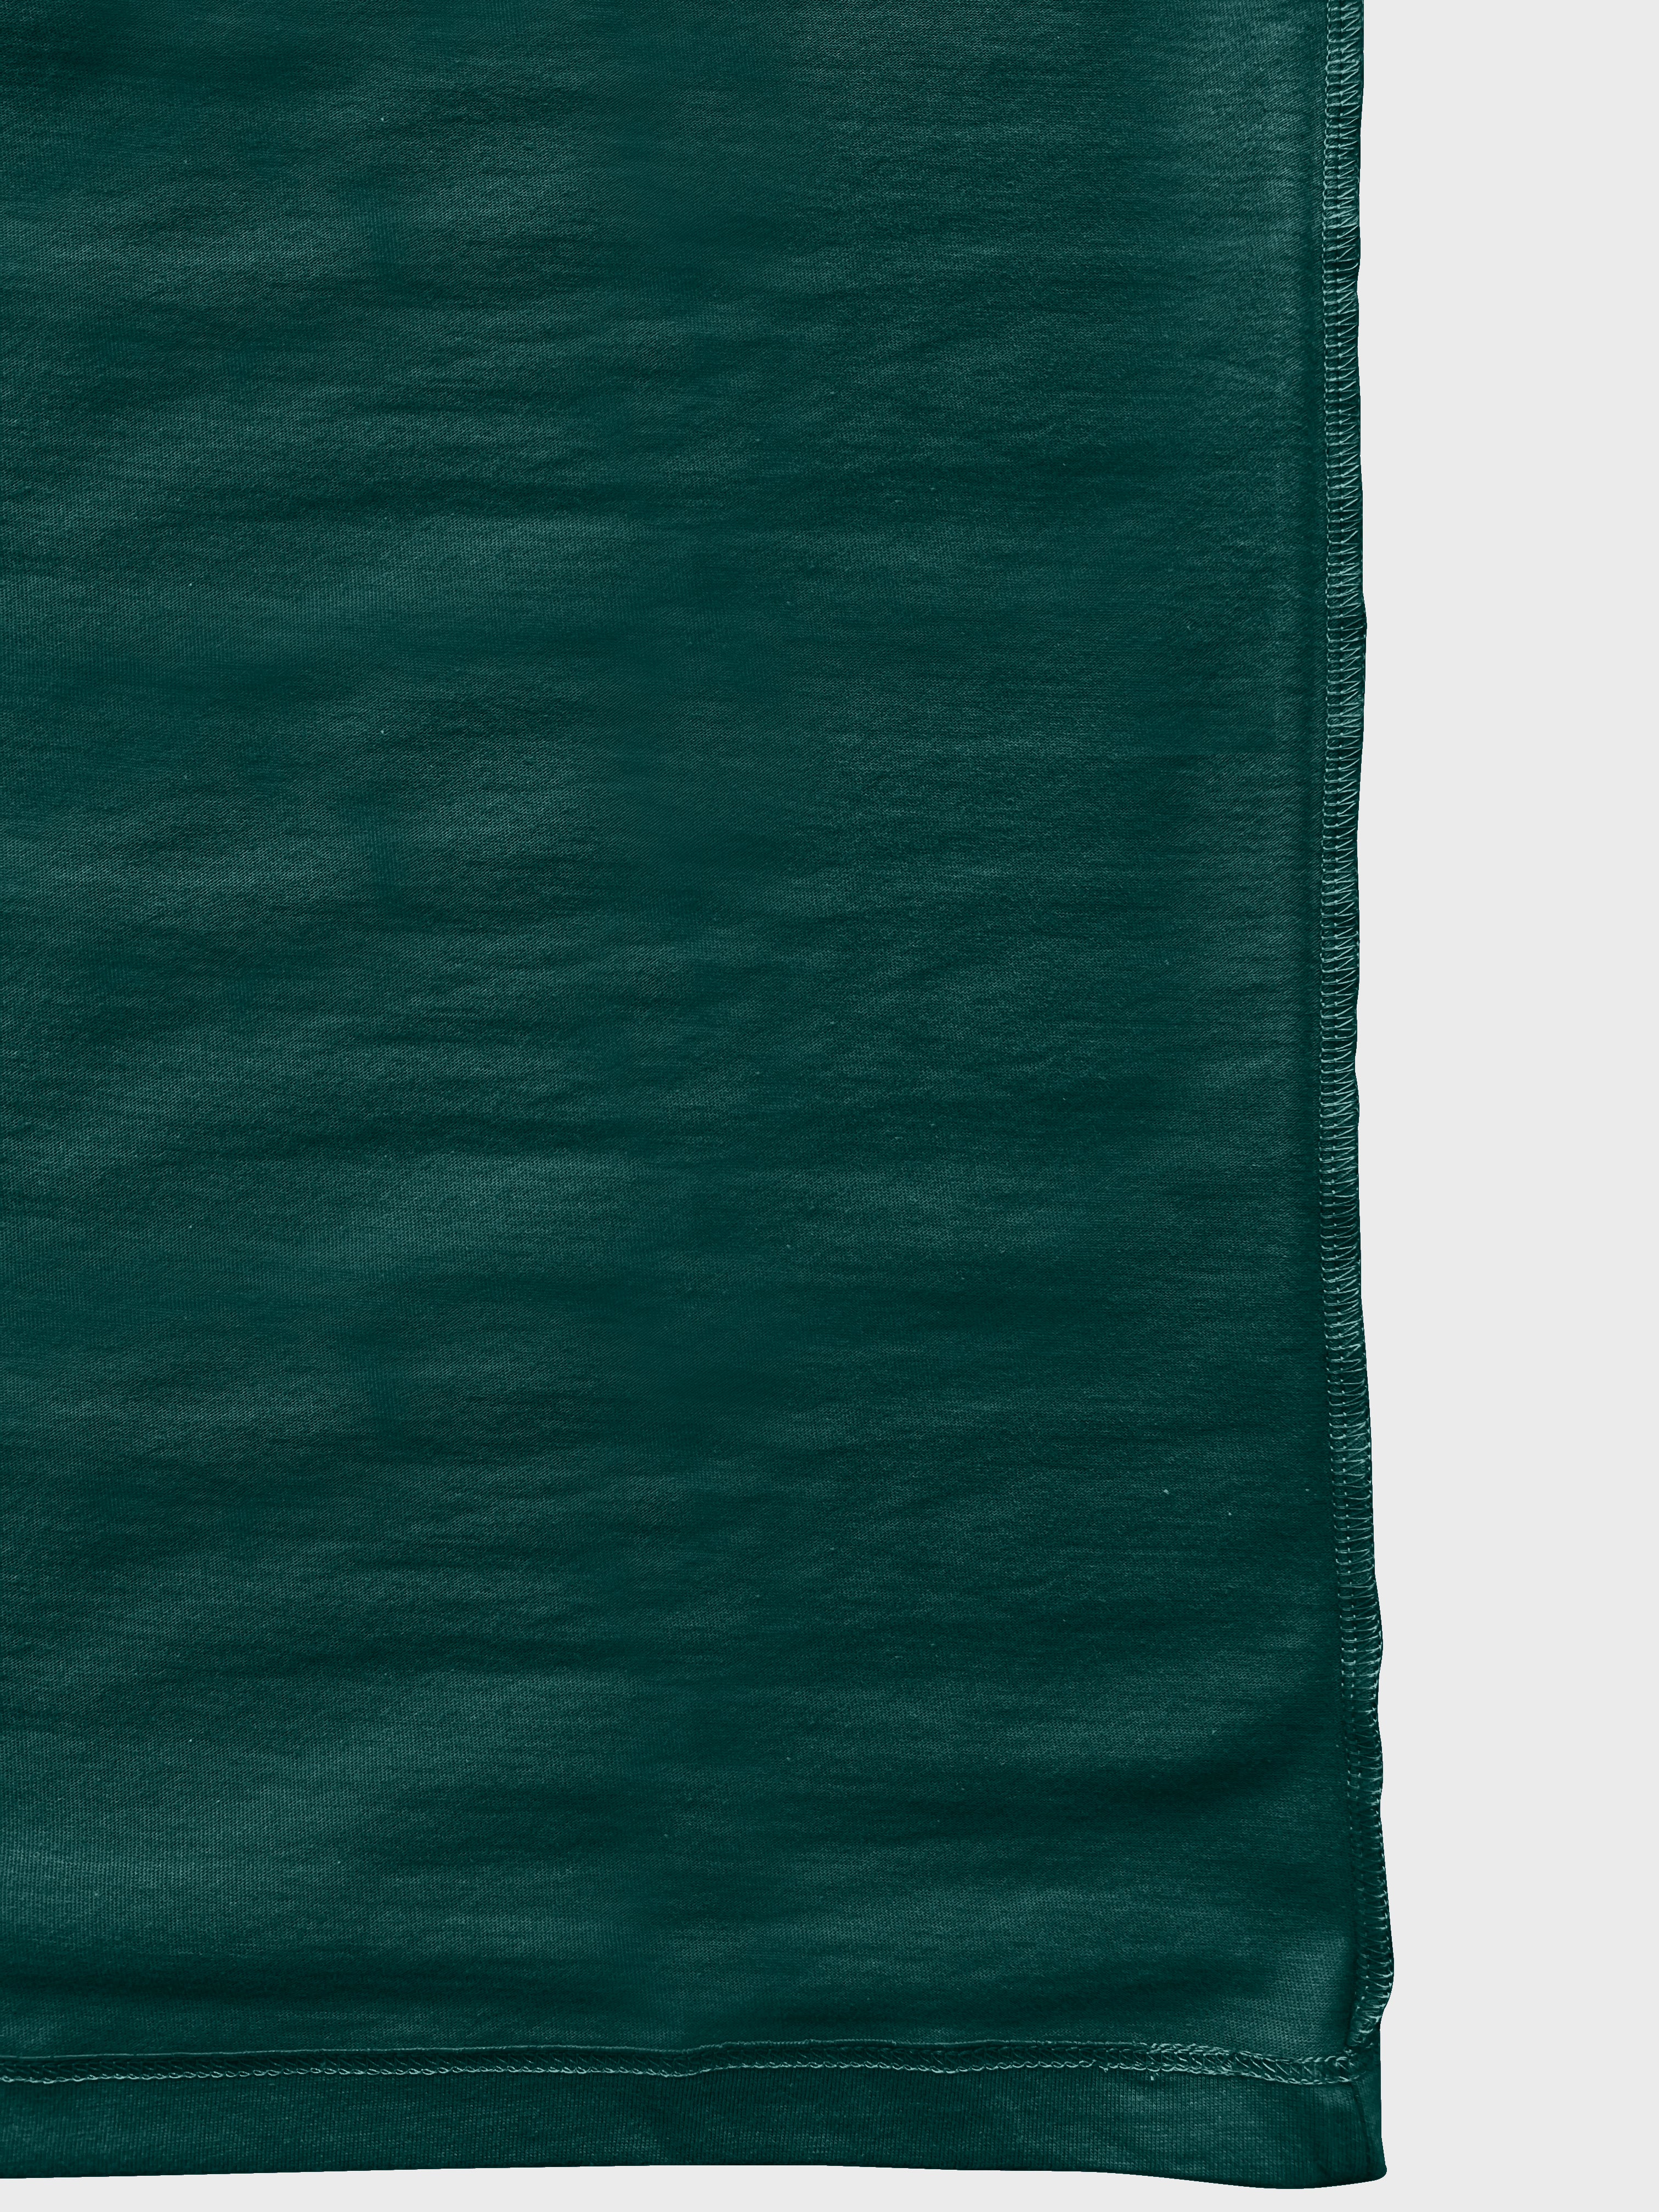 Crew Neck Forest Green blank T-shirt in side view